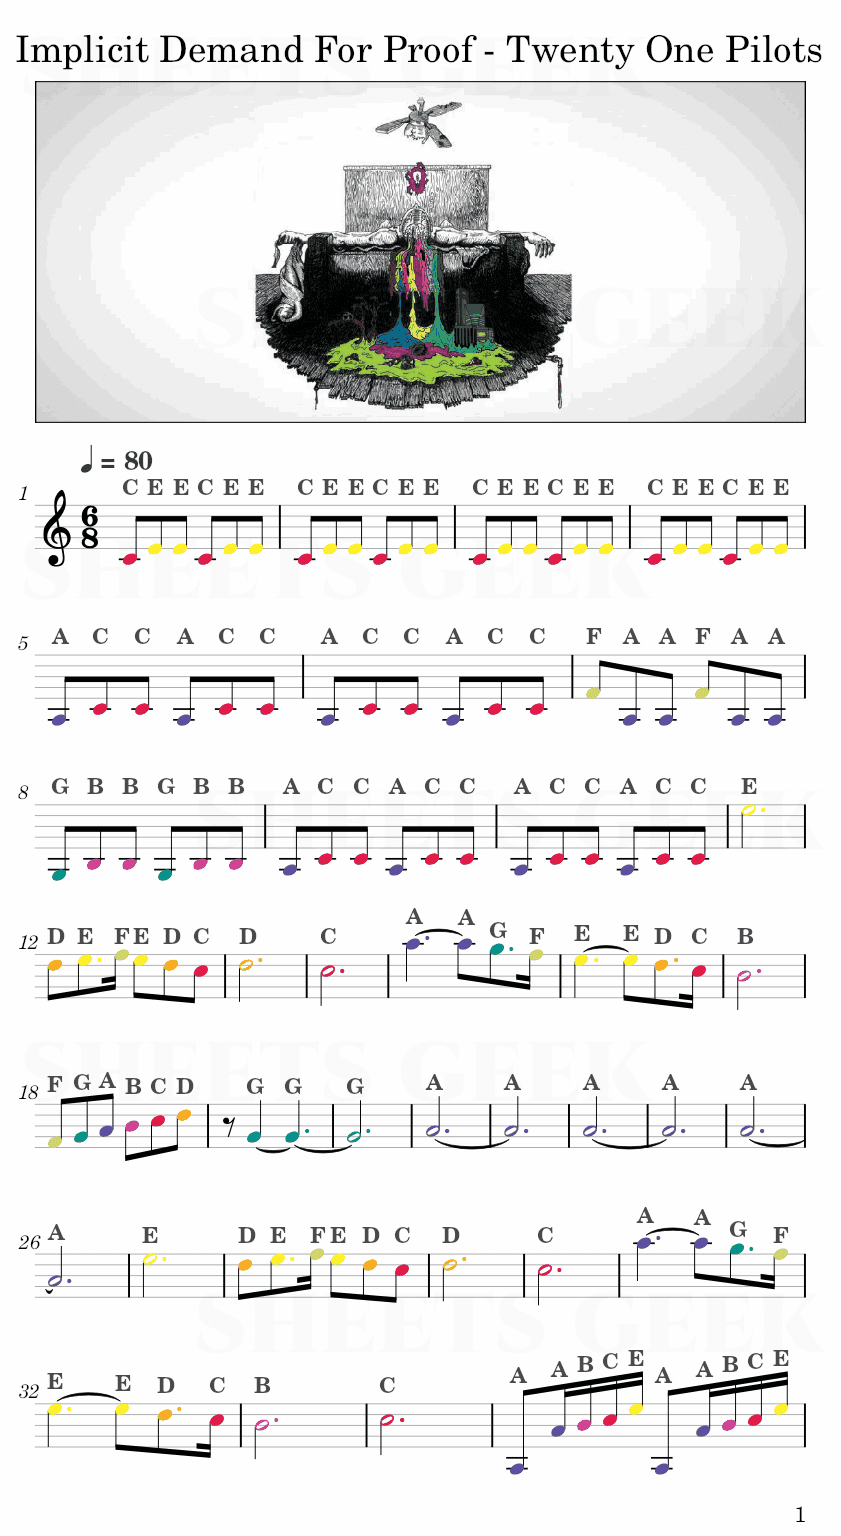 Implicit Demand For Proof - Twenty One Pilots Easy Sheet Music Free for piano, keyboard, flute, violin, sax, cello page 1